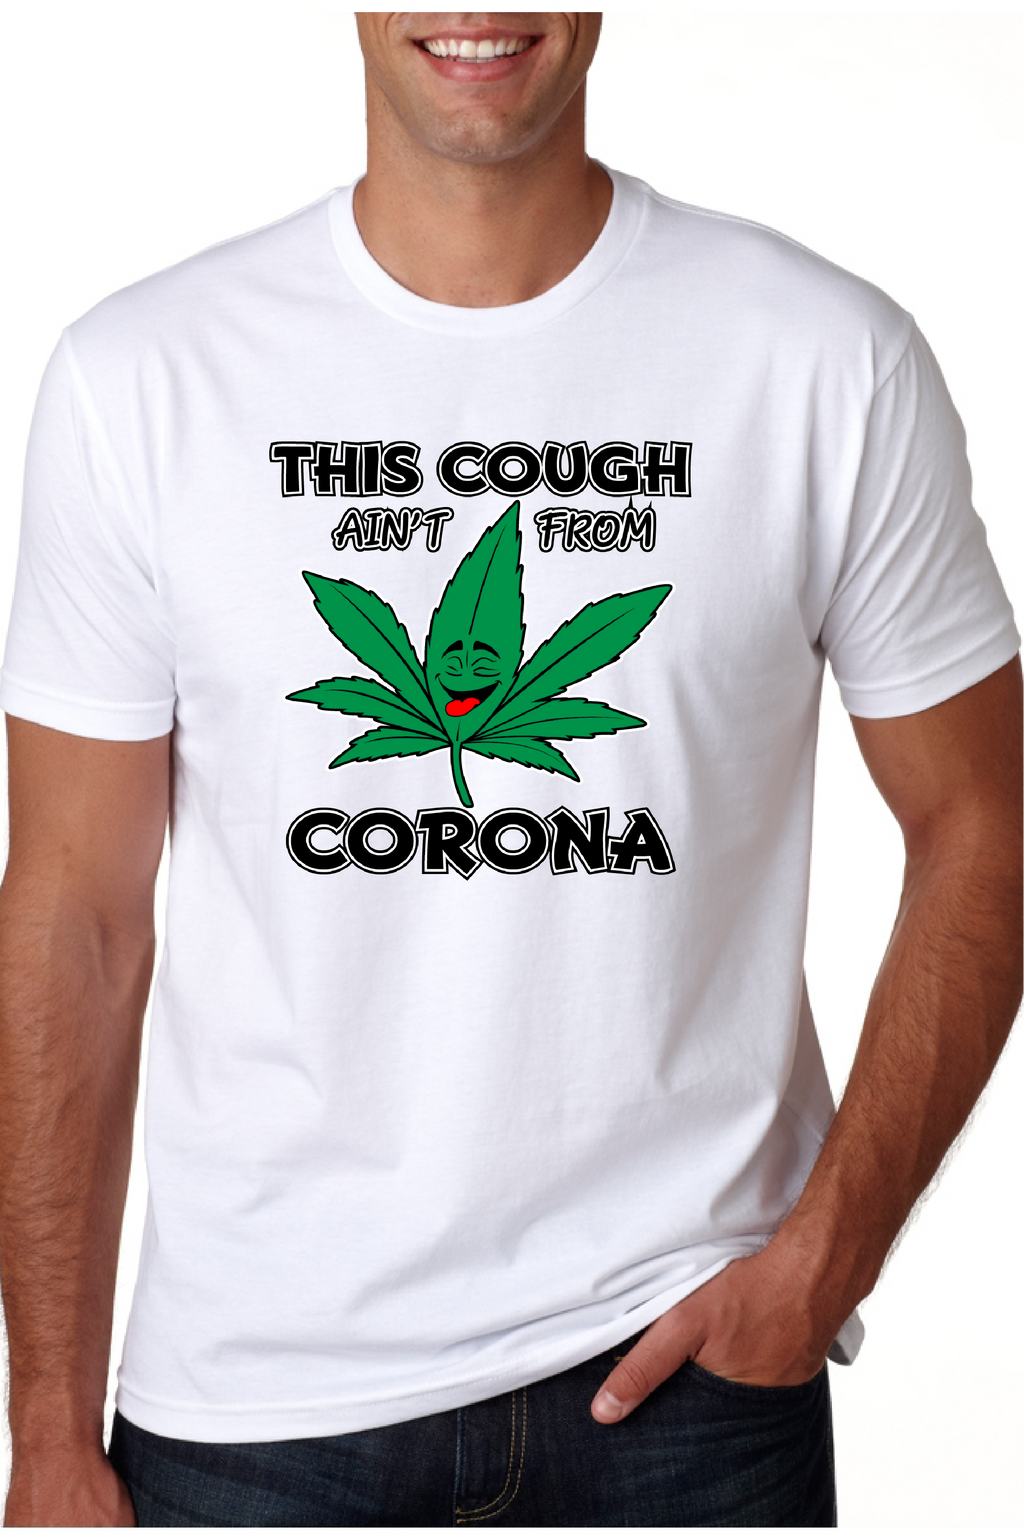 This Cough Ain't From Corona